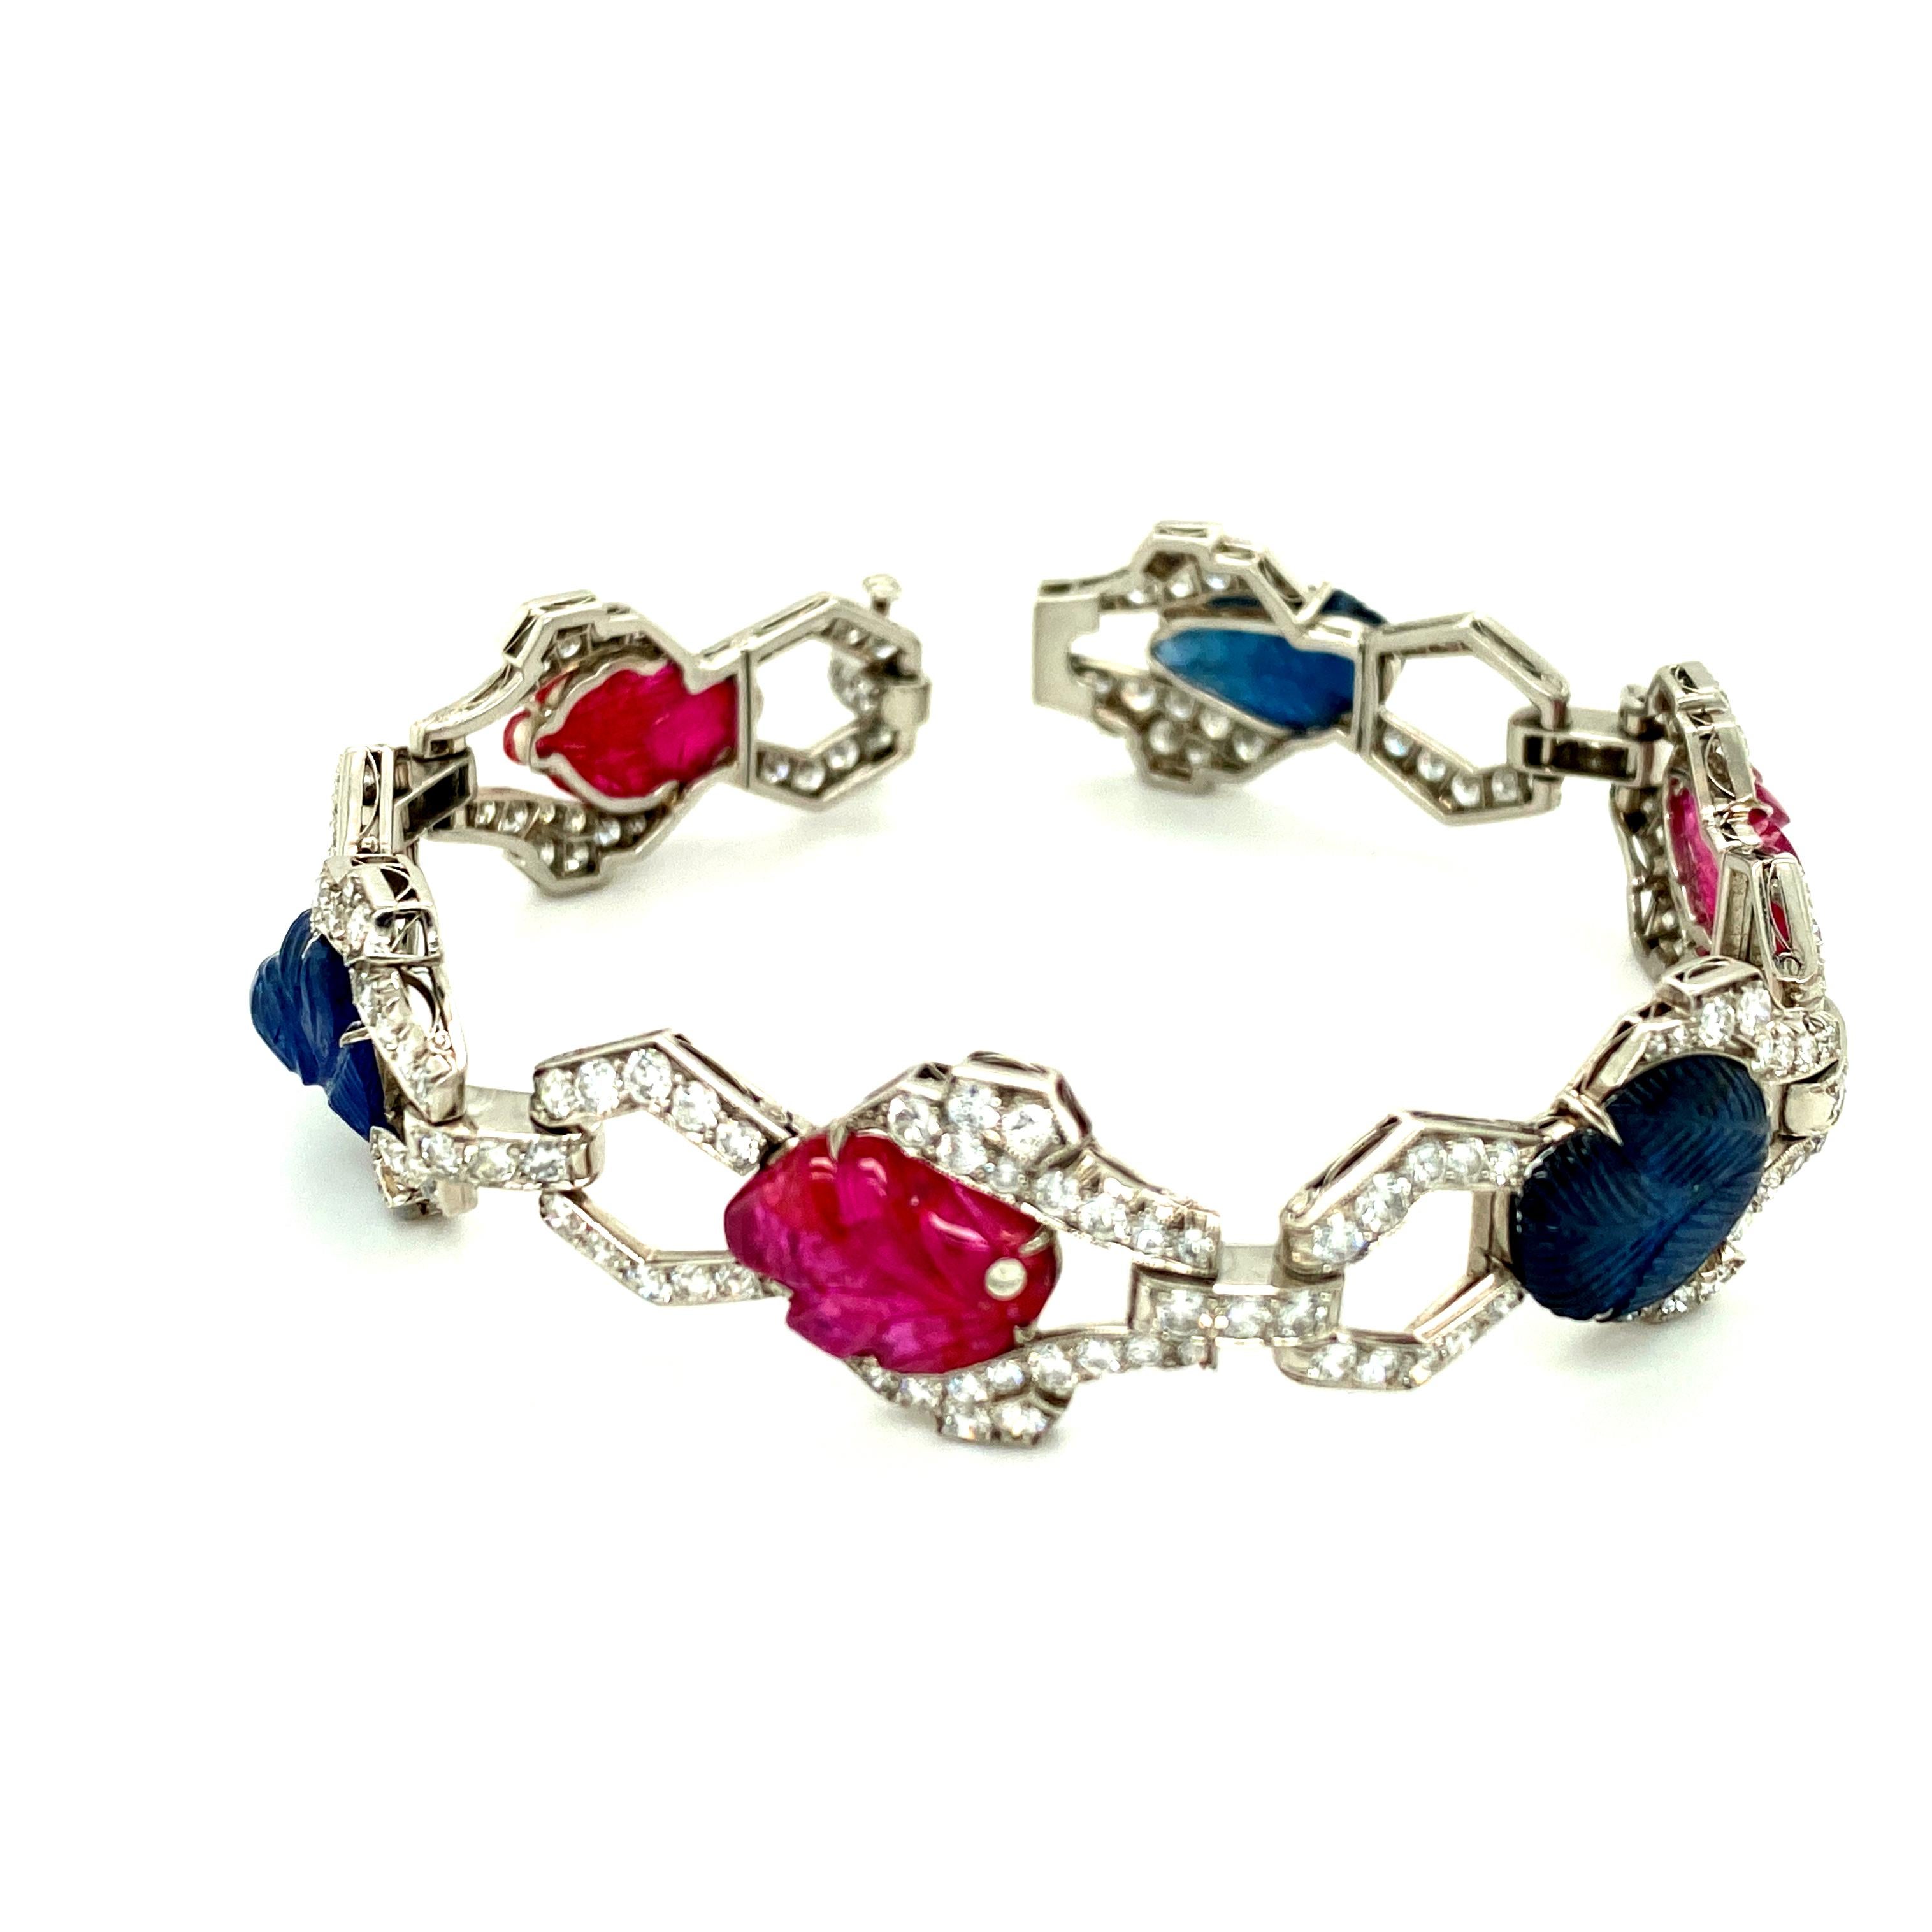 This Art Deco (1925-1935) Tutti Frutti platinum bracelet pairs approximately 6cts of round brilliant diamonds with an estimated 18cts of cabochon rubies and sapphires carved to resemble leaves.  The bracelet's design alternates the symmetrical links